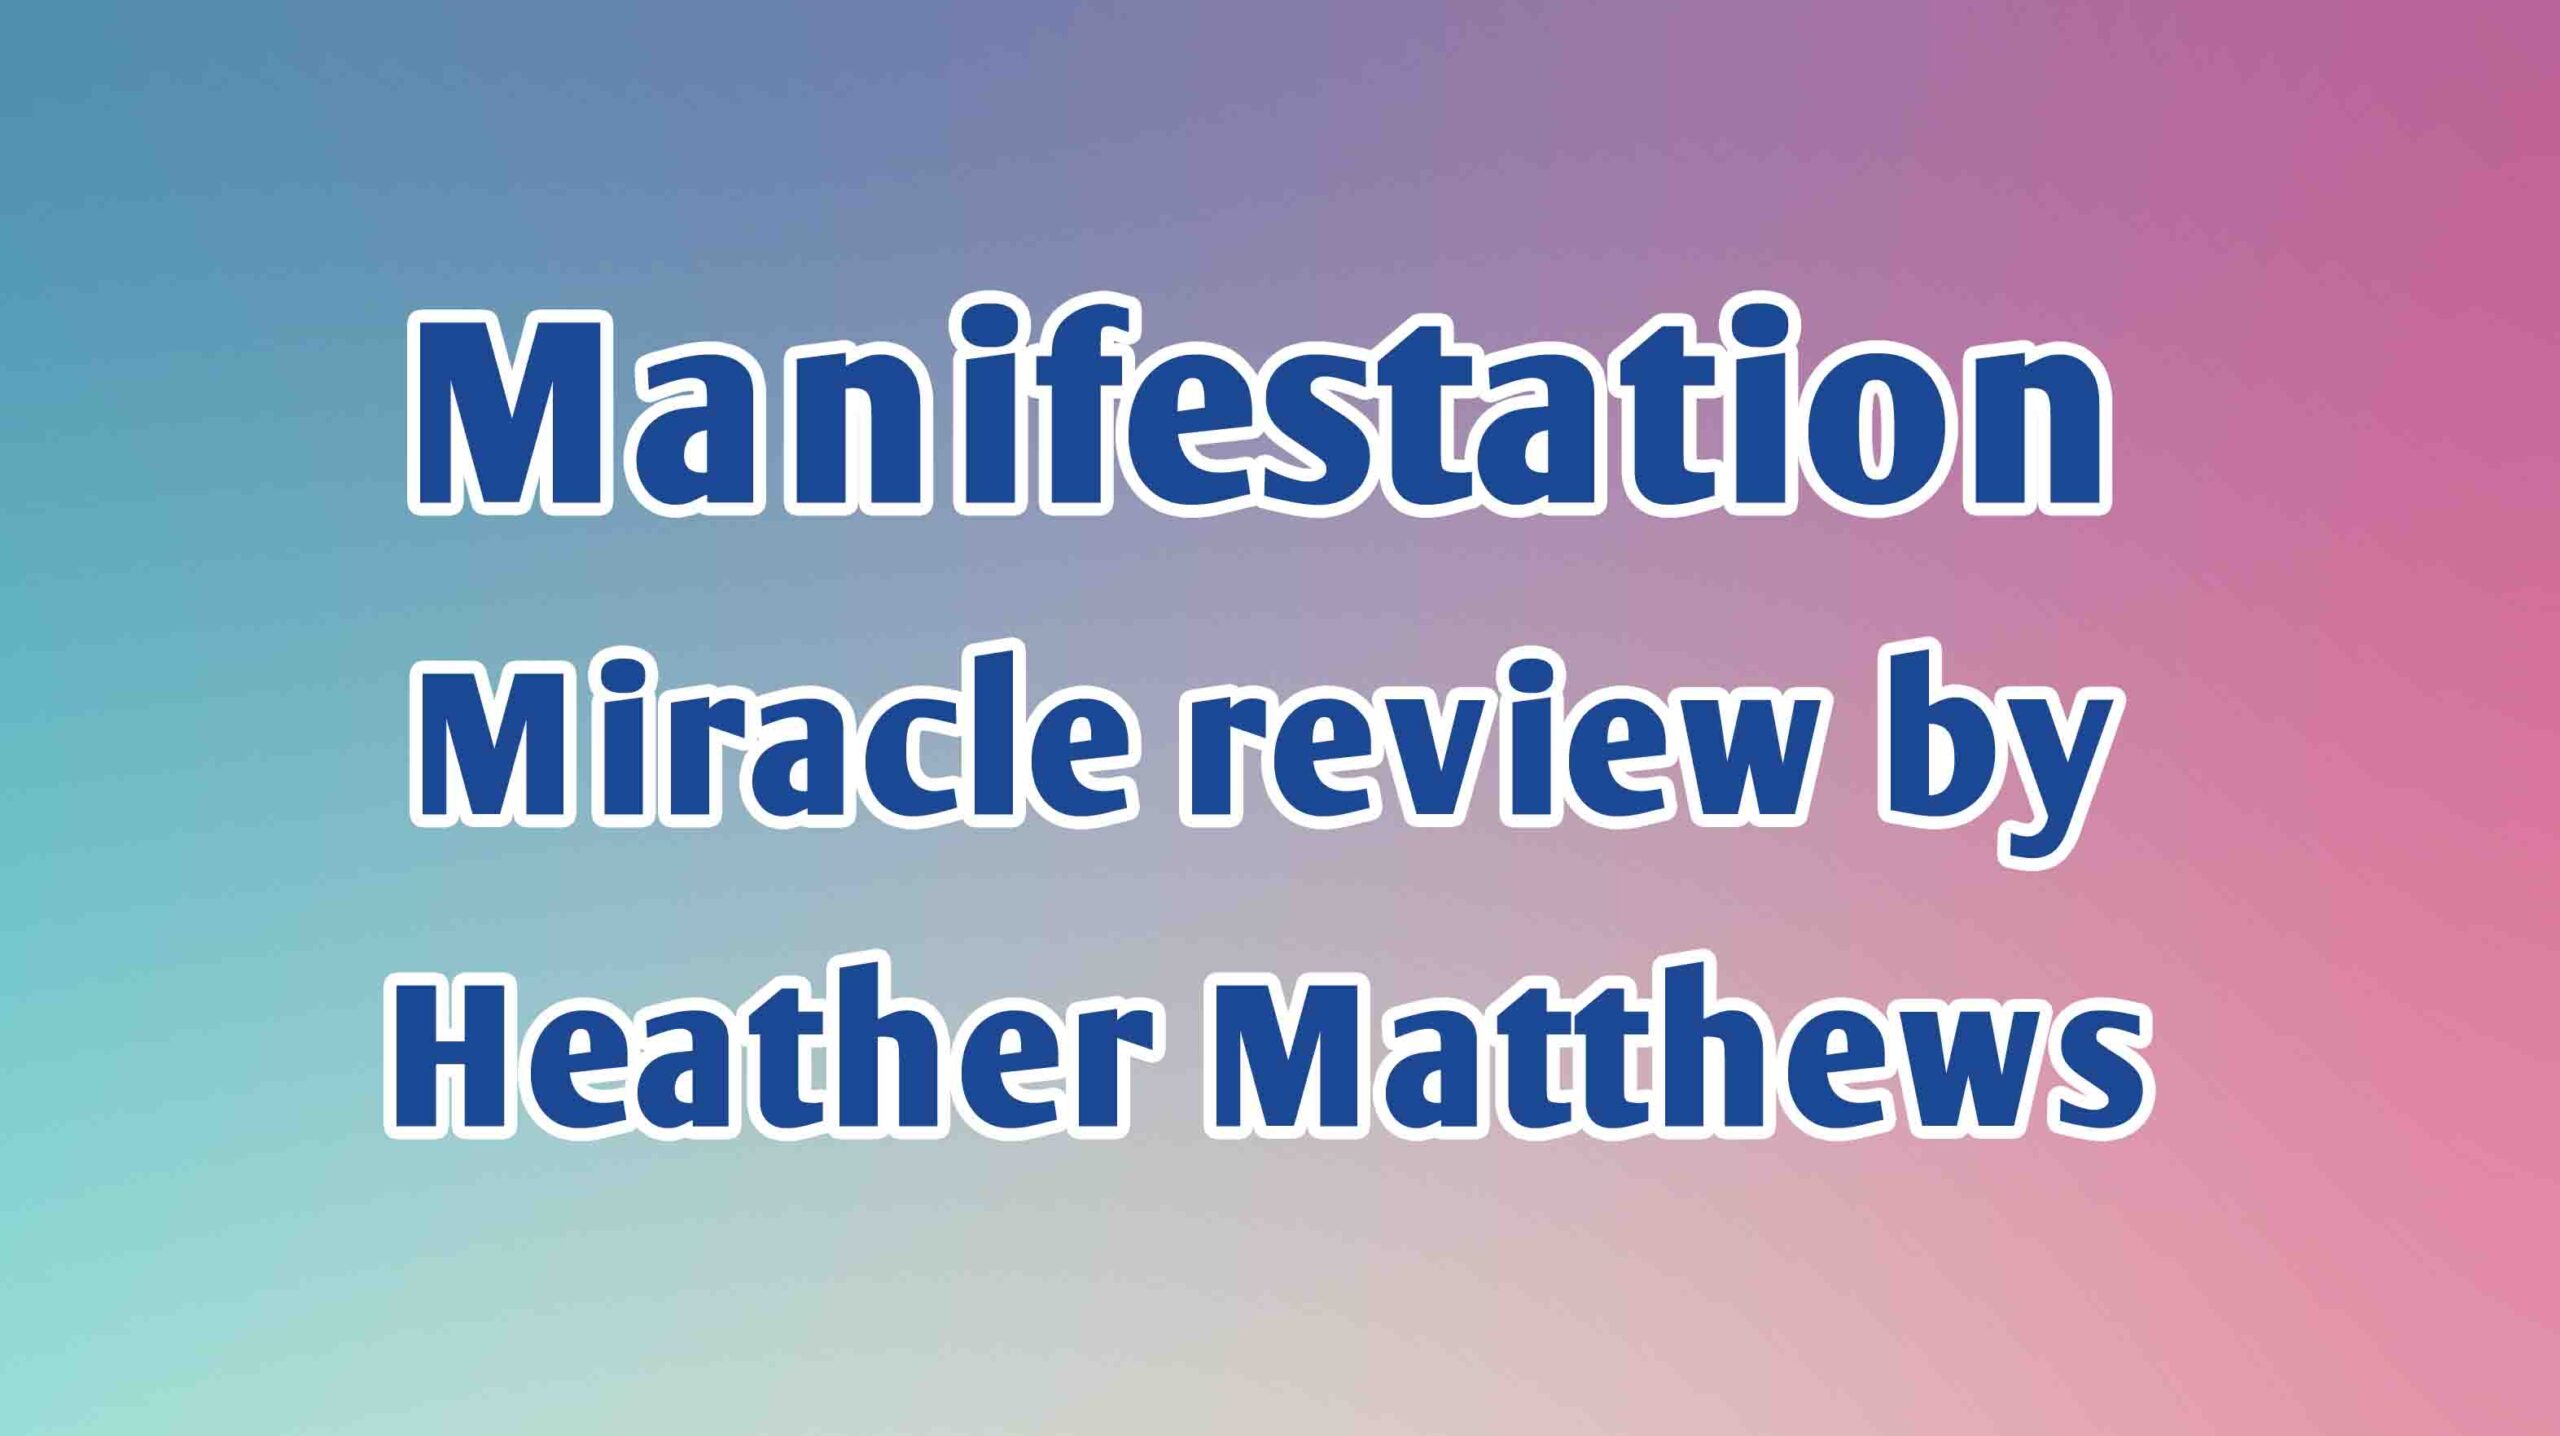 manifestation miracle review by Heather Matthews